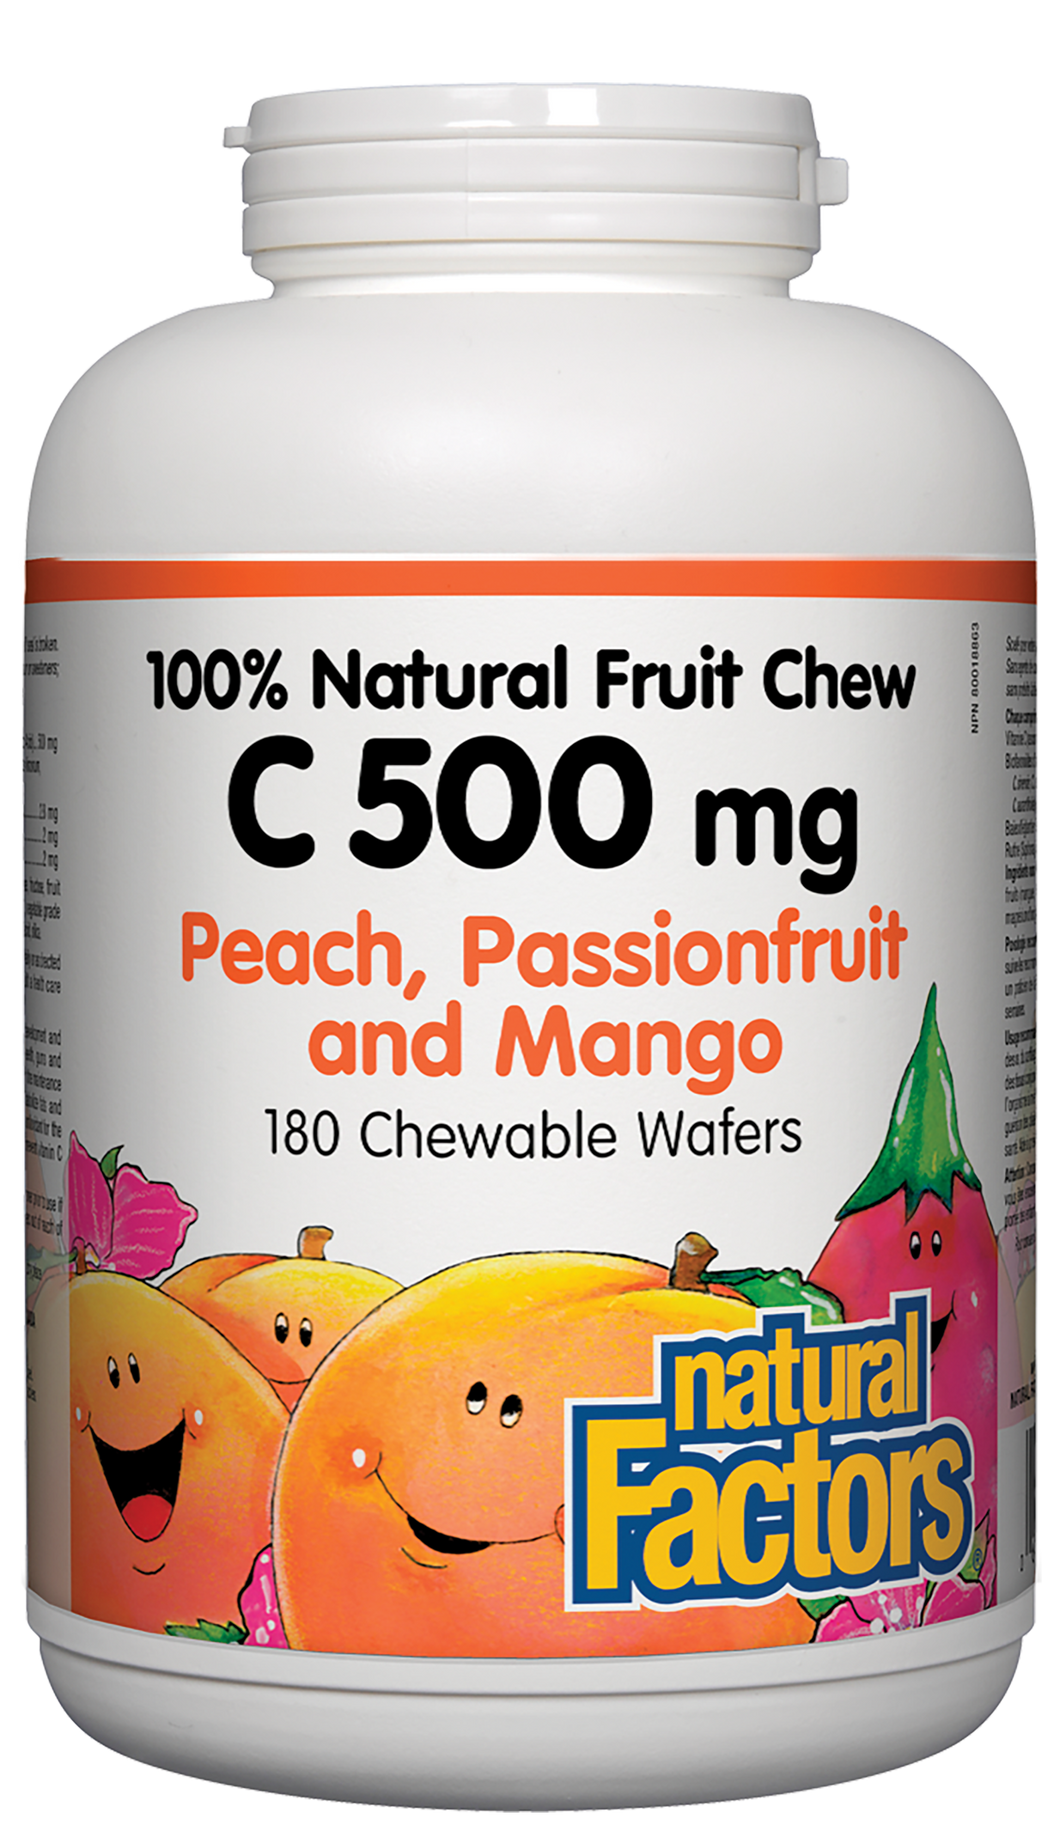 Natural Factors 100% Natural Fruit Chew C 500 mg is an easy-to-take vitamin for the development and maintenance of bones, cartilage, teeth, gums, and for connective tissue formation. 